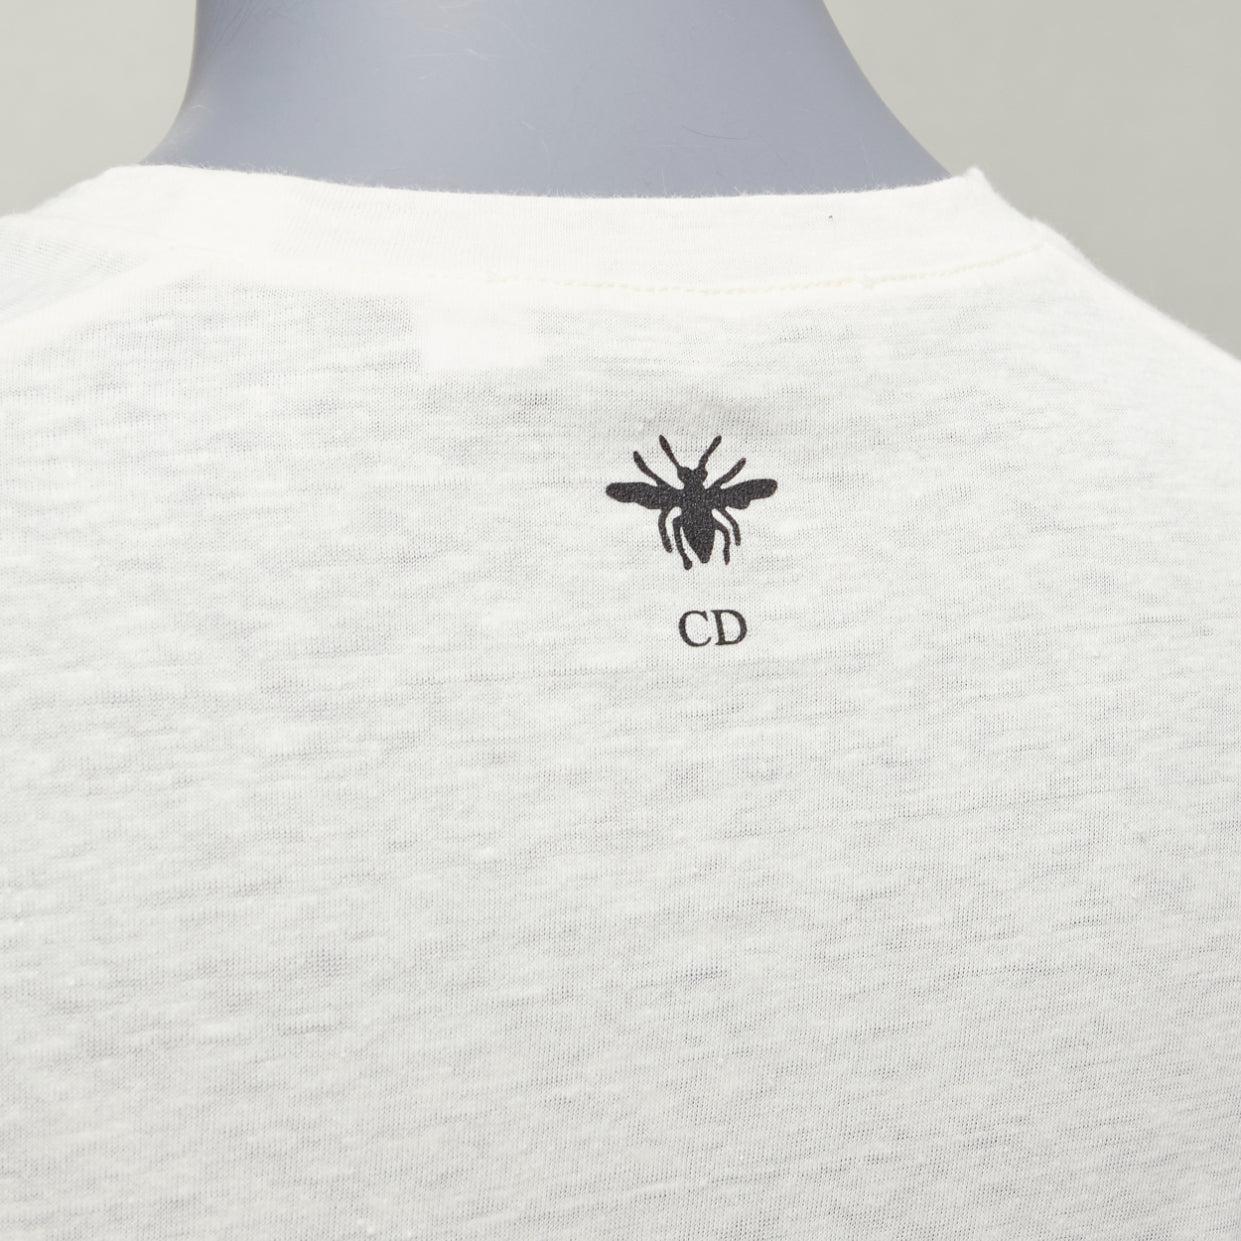 CHRISTIAN DIOR cream cotton linen brutal journey of the heart crew tshirt S
Reference: AAWC/A00788
Brand: Dior
Material: Linen
Color: Cream, Multicolour
Pattern: Abstract
Closure: Pull On
Extra Details: CD bee logo at back.
Made in: